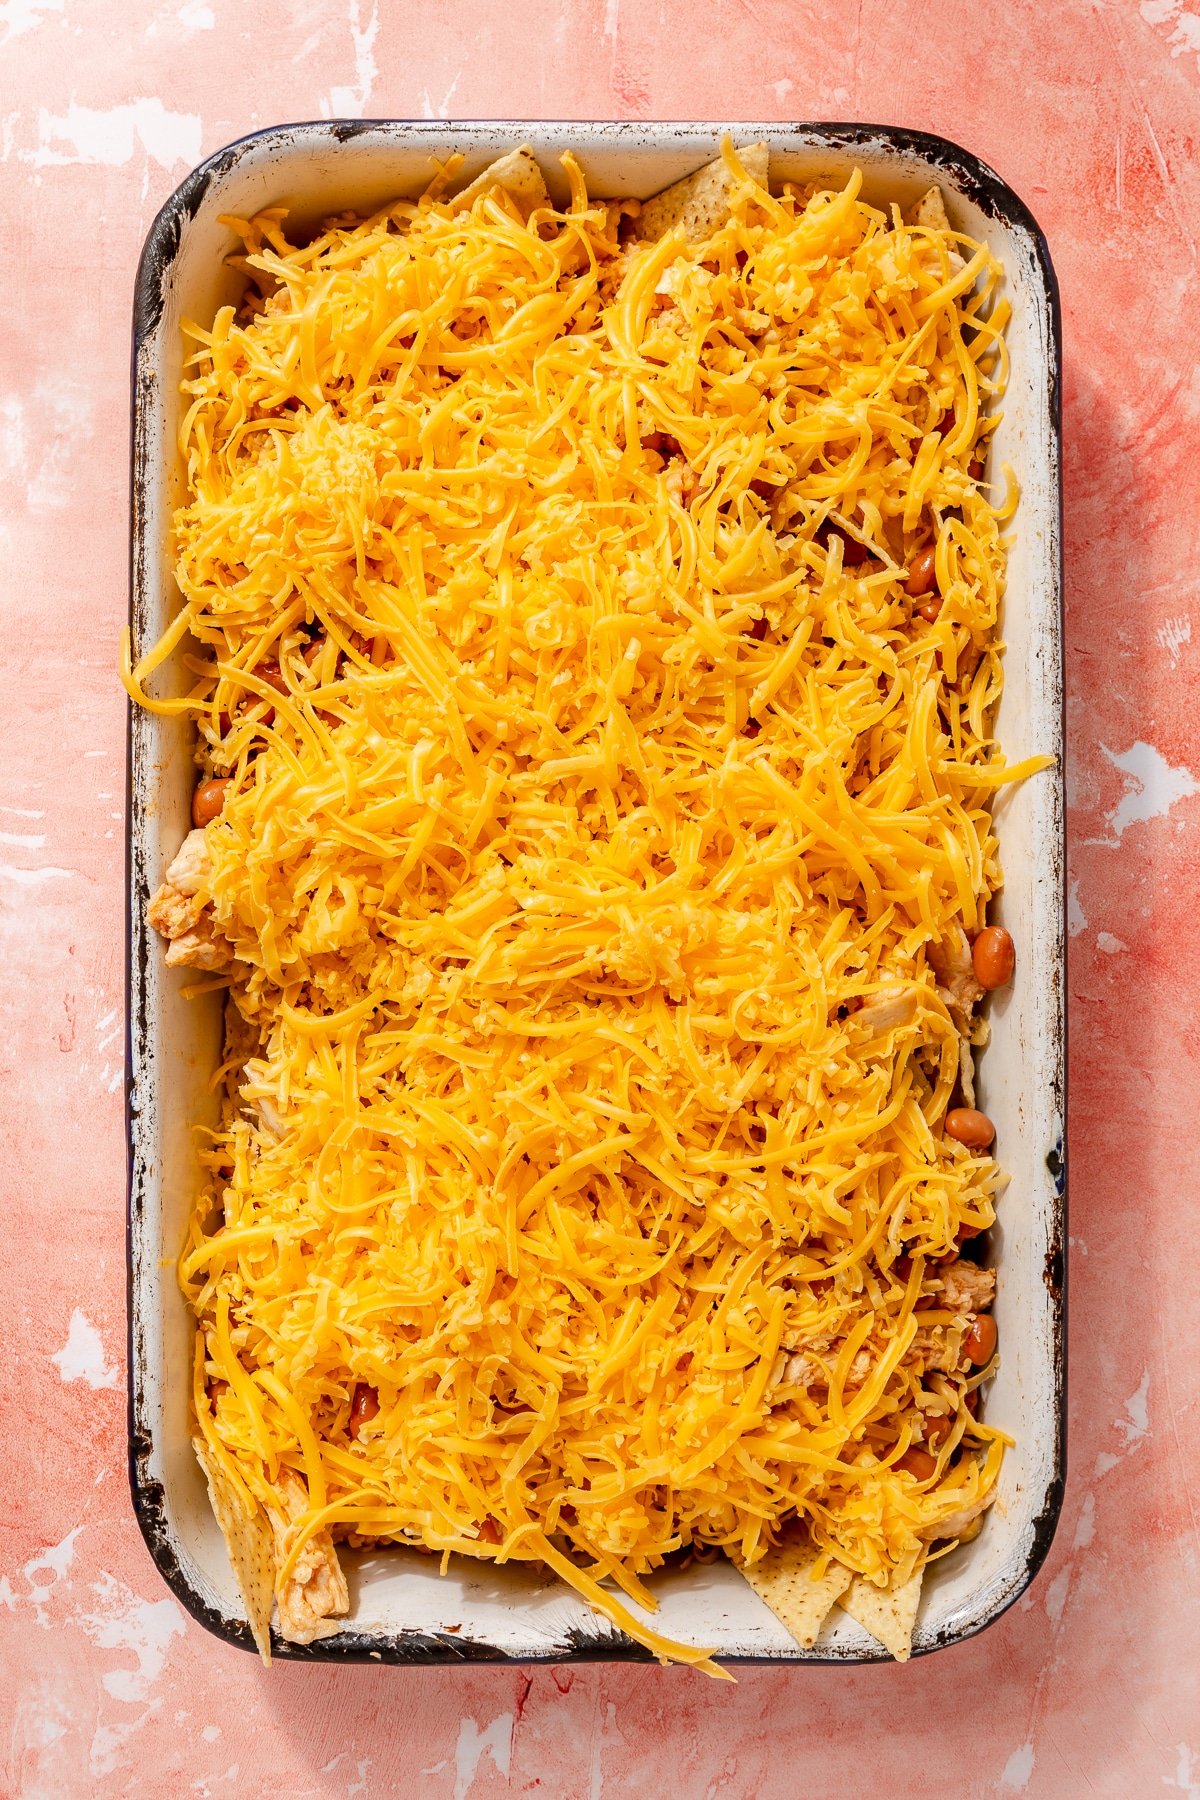 Fully assembled nachos sit on a white sheet pan. Shredded cheddar cheese covers them.